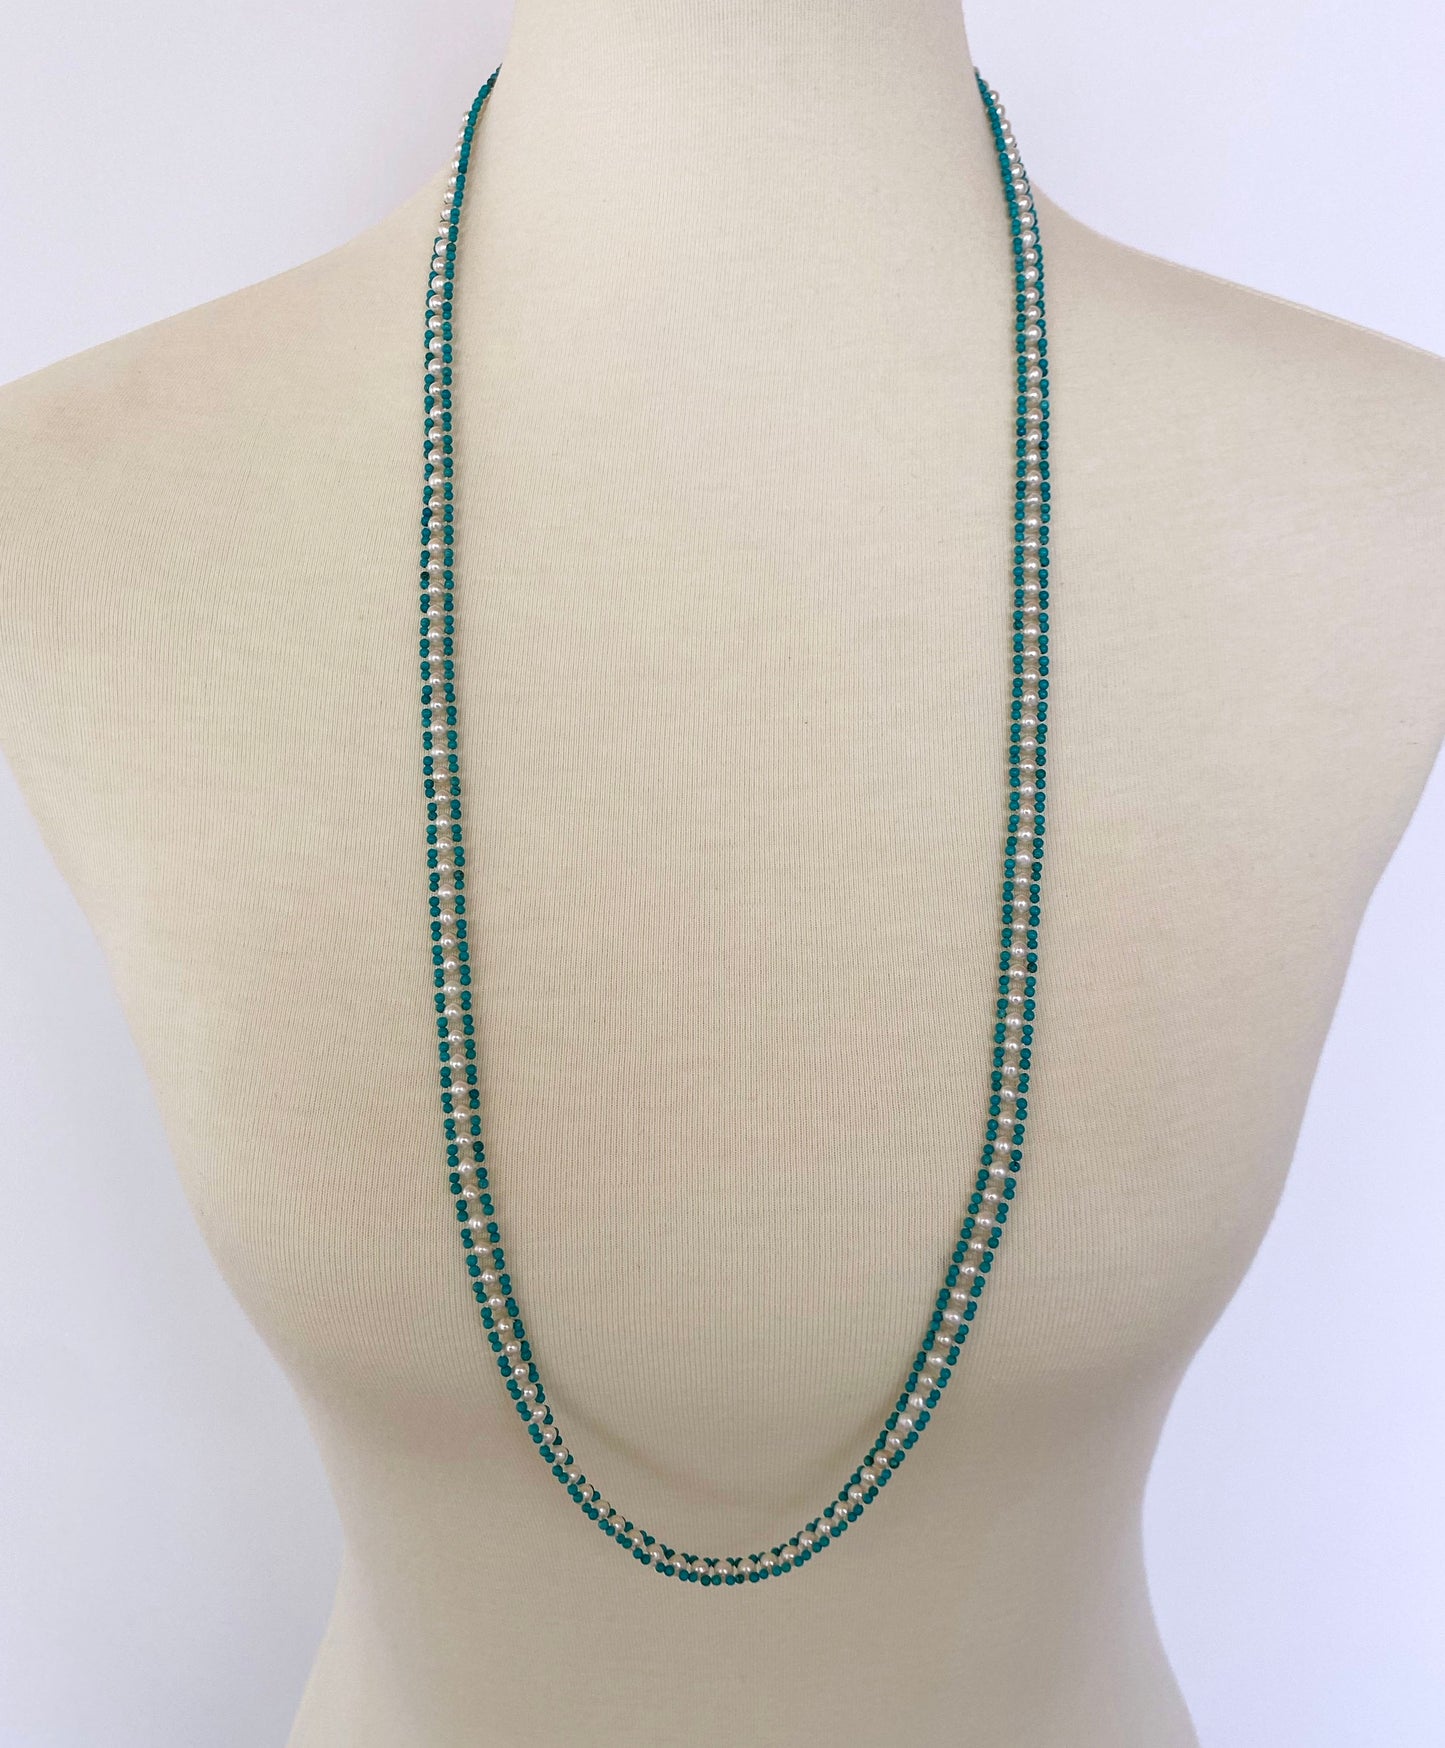 Marina J. Woven Pearl and Turquoise Beaded Sautoir with Graduated Pearl Tassel and 14K